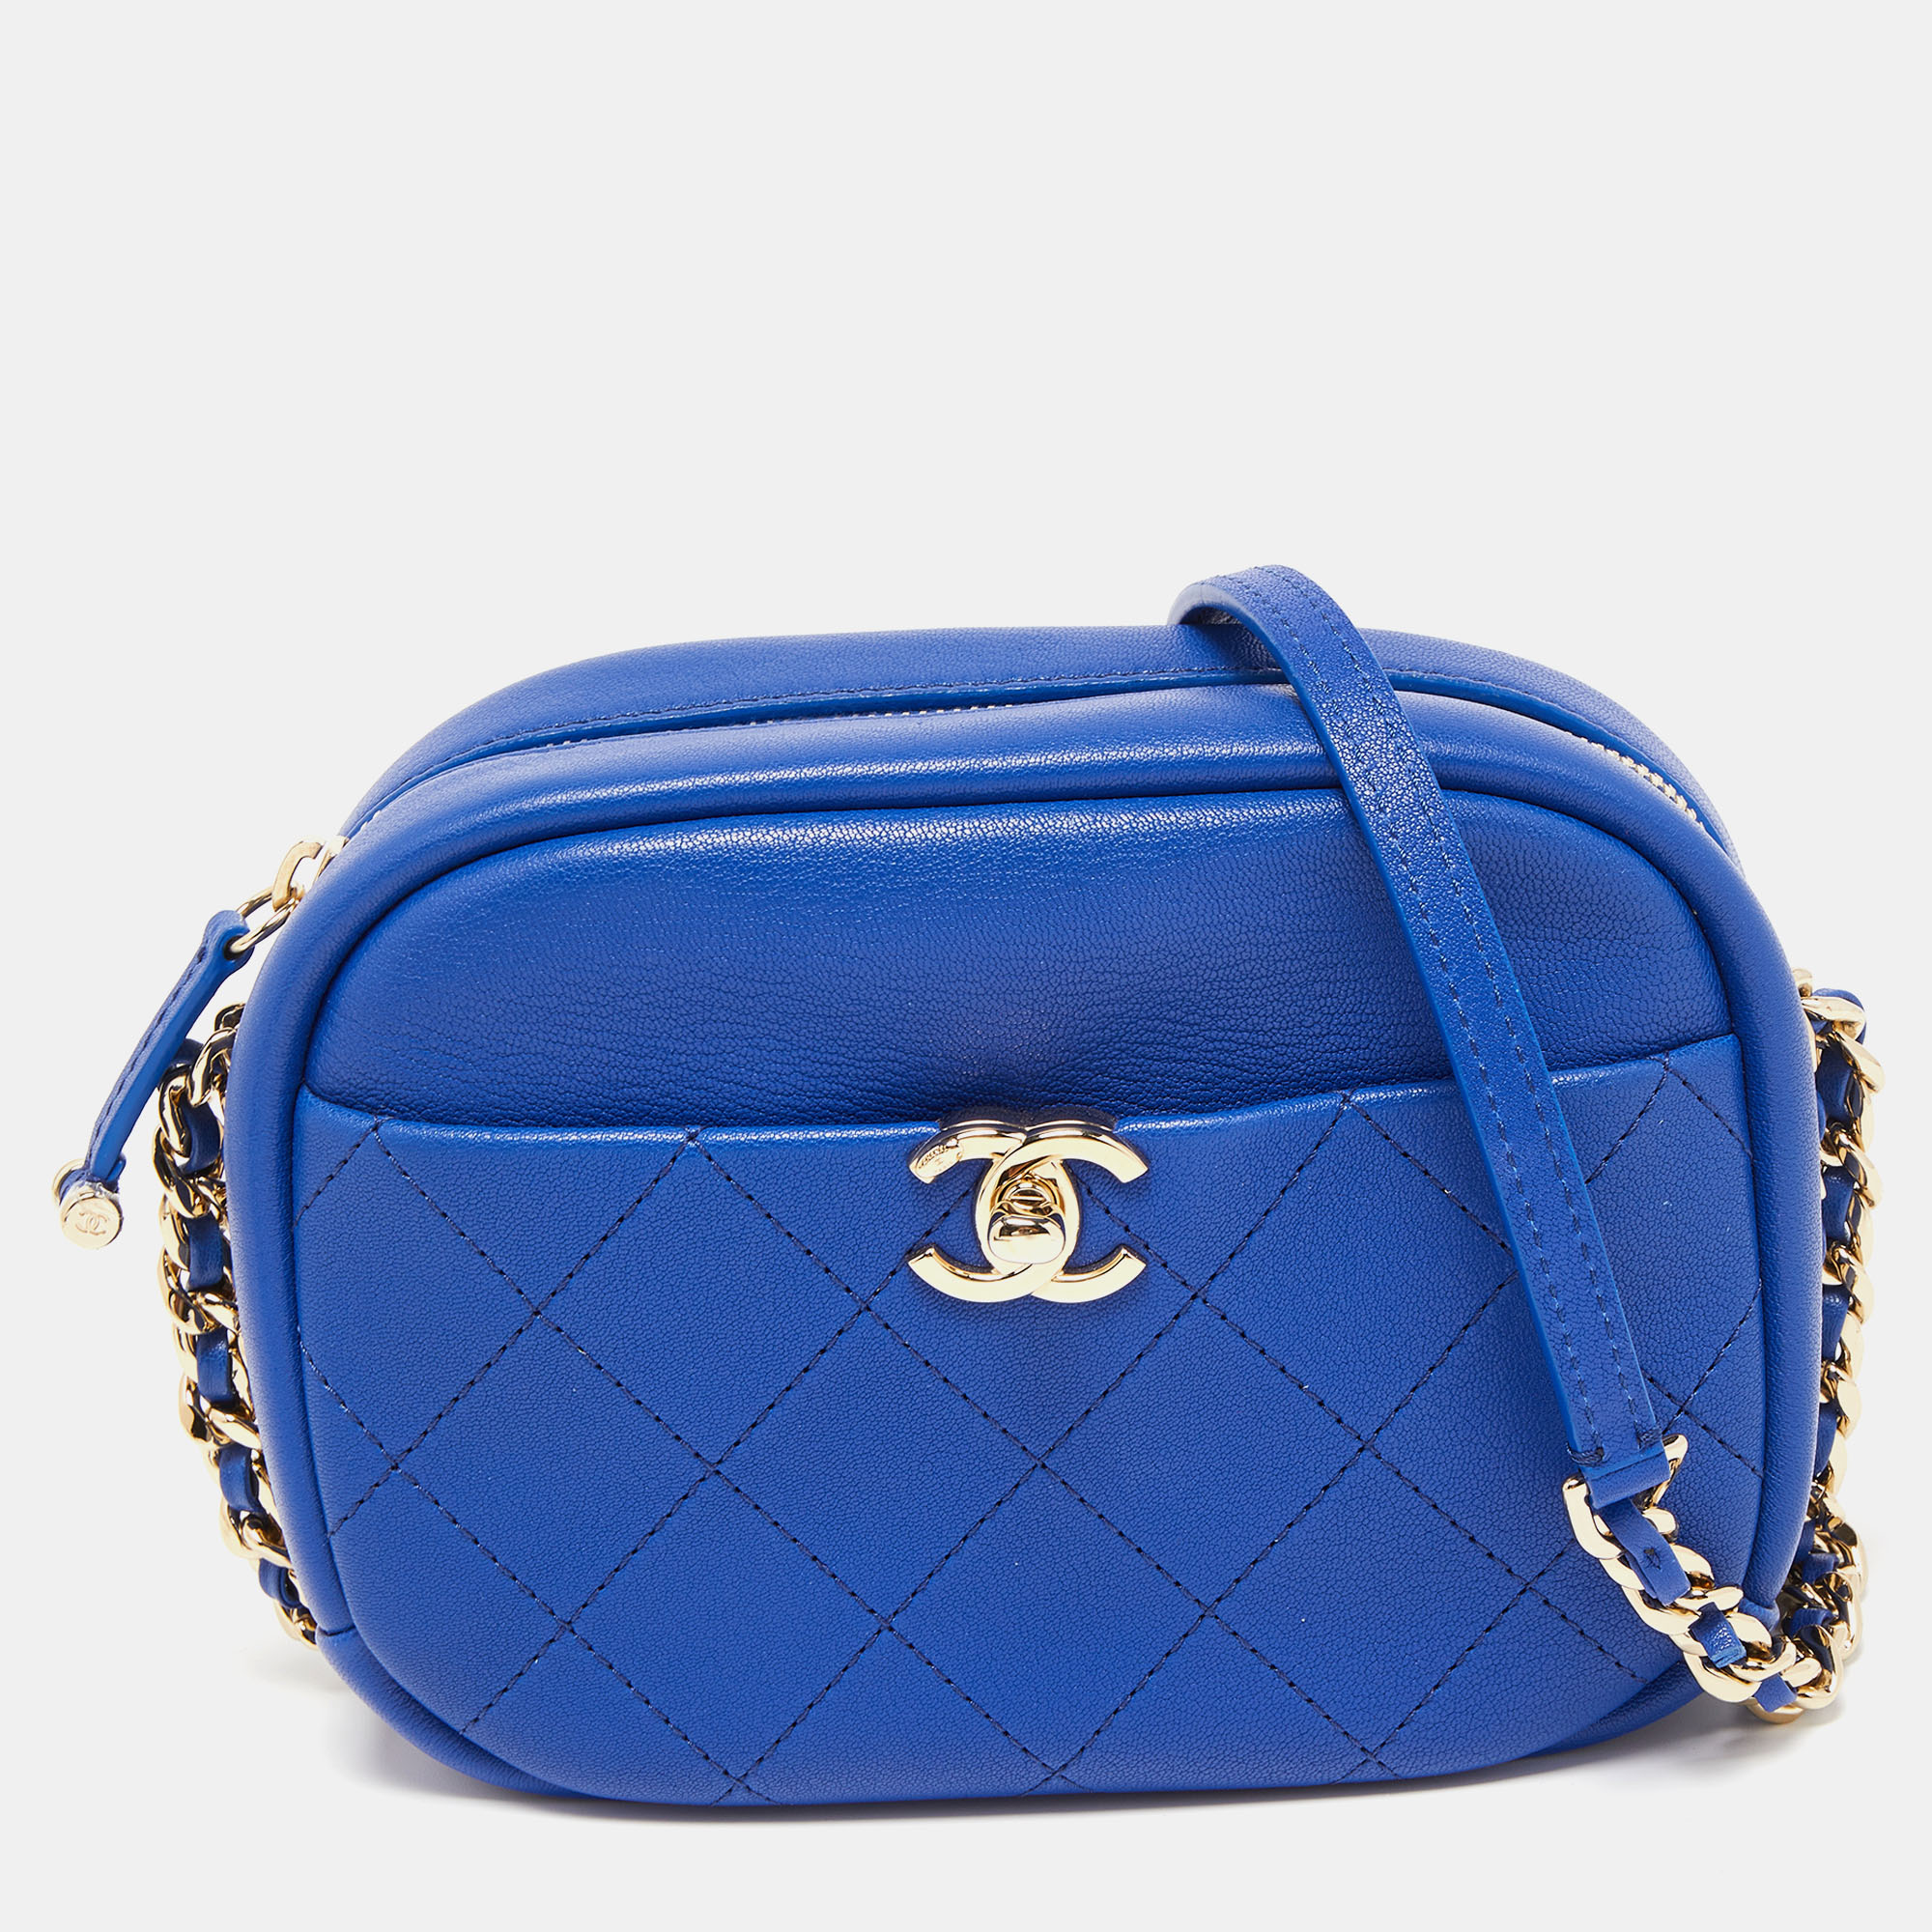 Pre-owned Chanel Blue Quilted Leather Small Casual Trip Camera Crossbody Bag